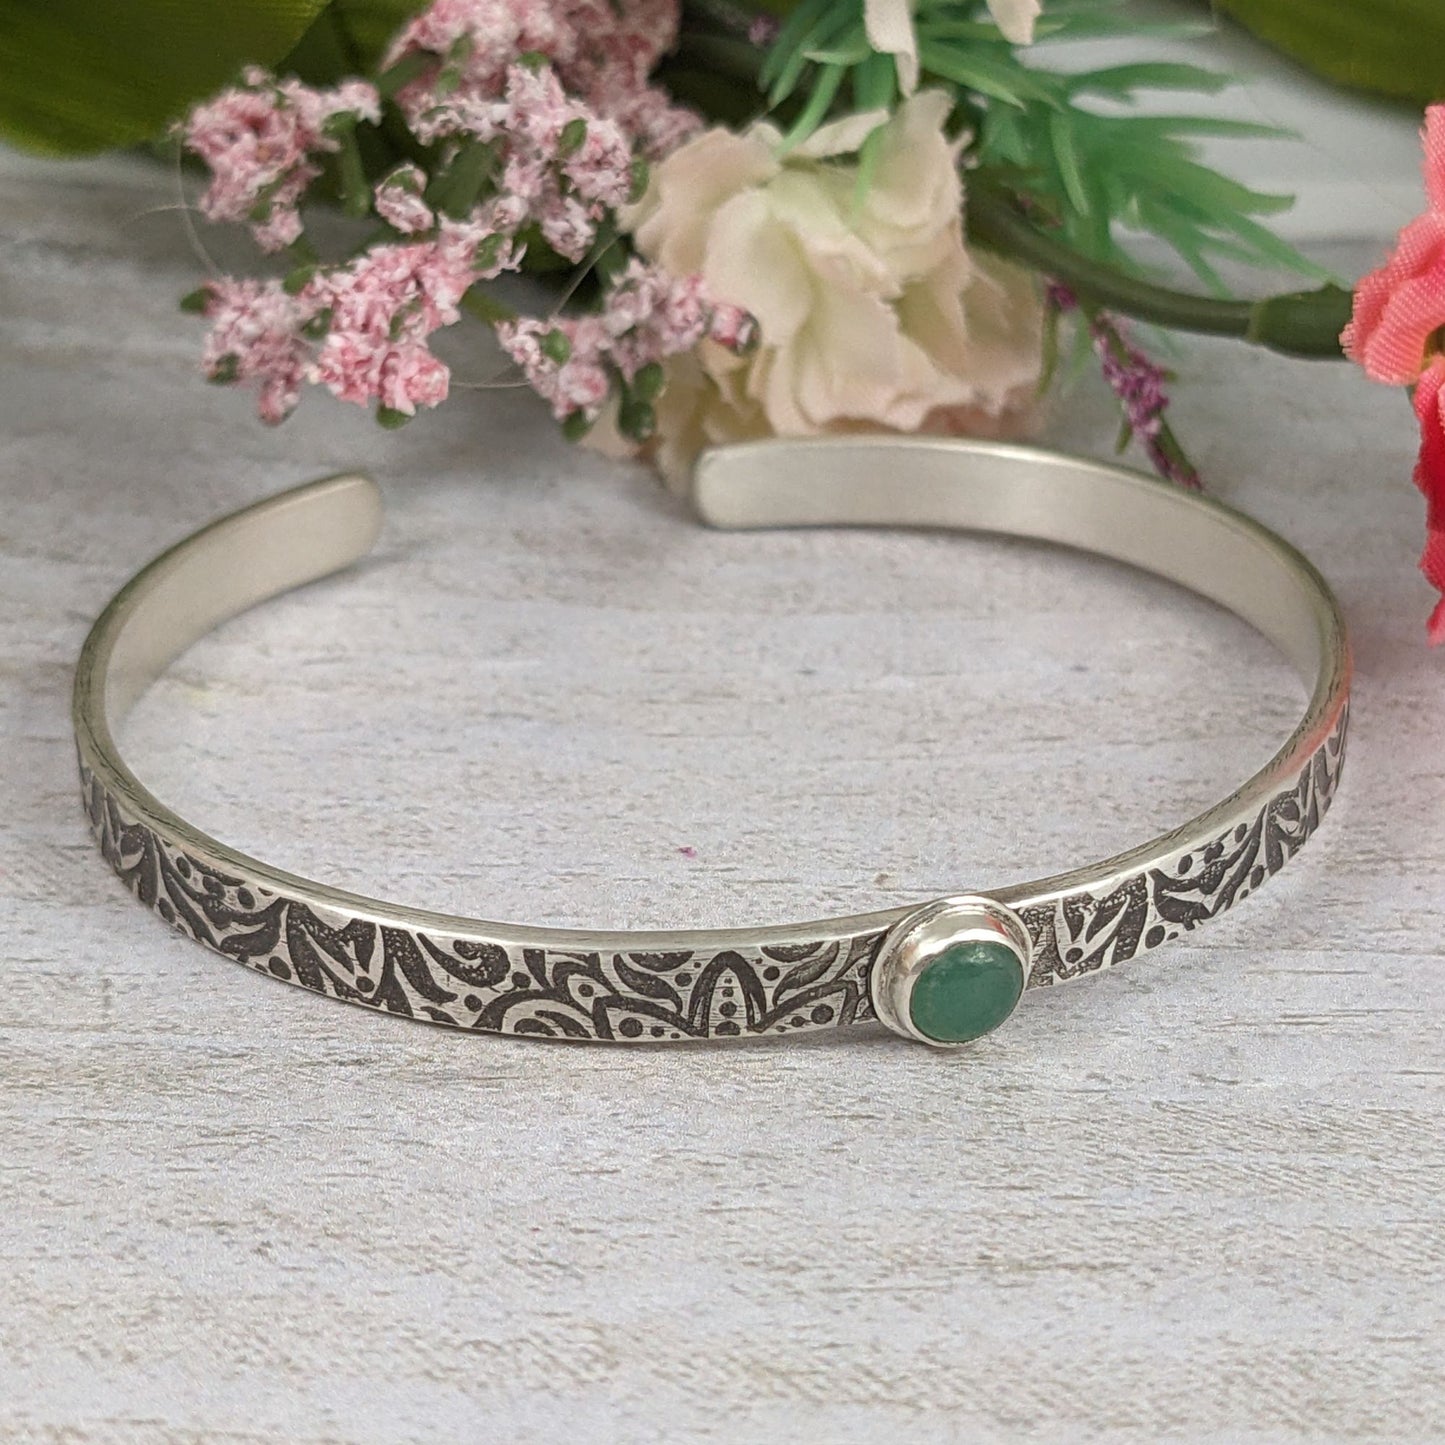 Narrow sterling silver cuff bracelet with a green aventurine gemstone. The rectangular silver wire has a n abstract impressed design, and the impression is oxidized black to bring out the details. Staged with flowers in the background.